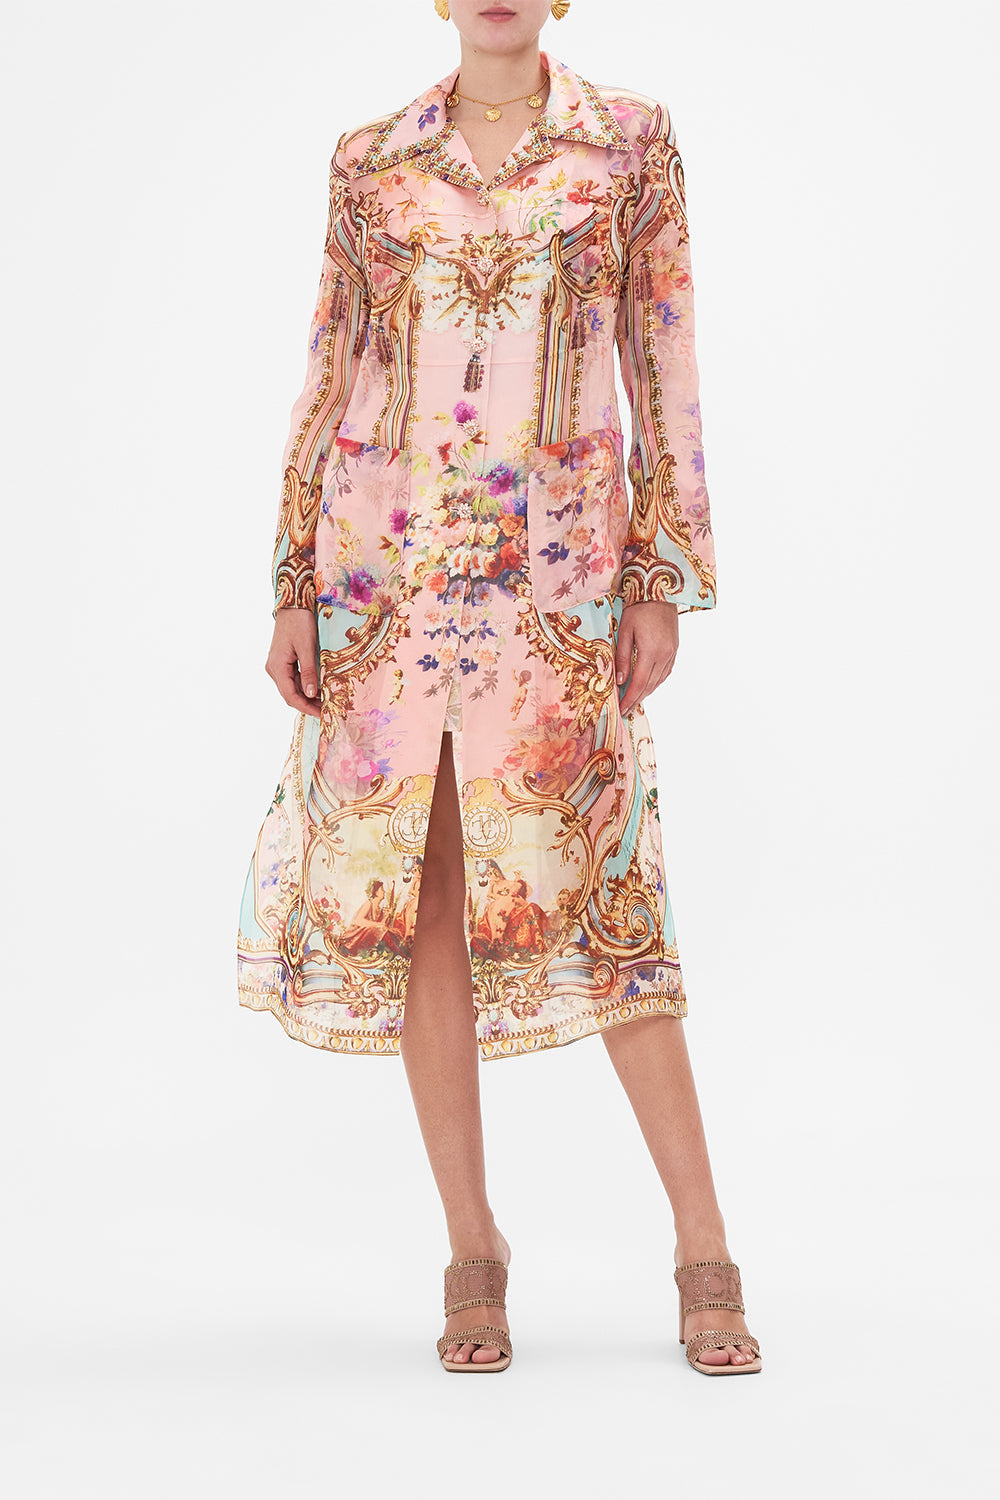 Front view of model wearing CAMILLA long pink silk coat in Letters From The Pink Room print